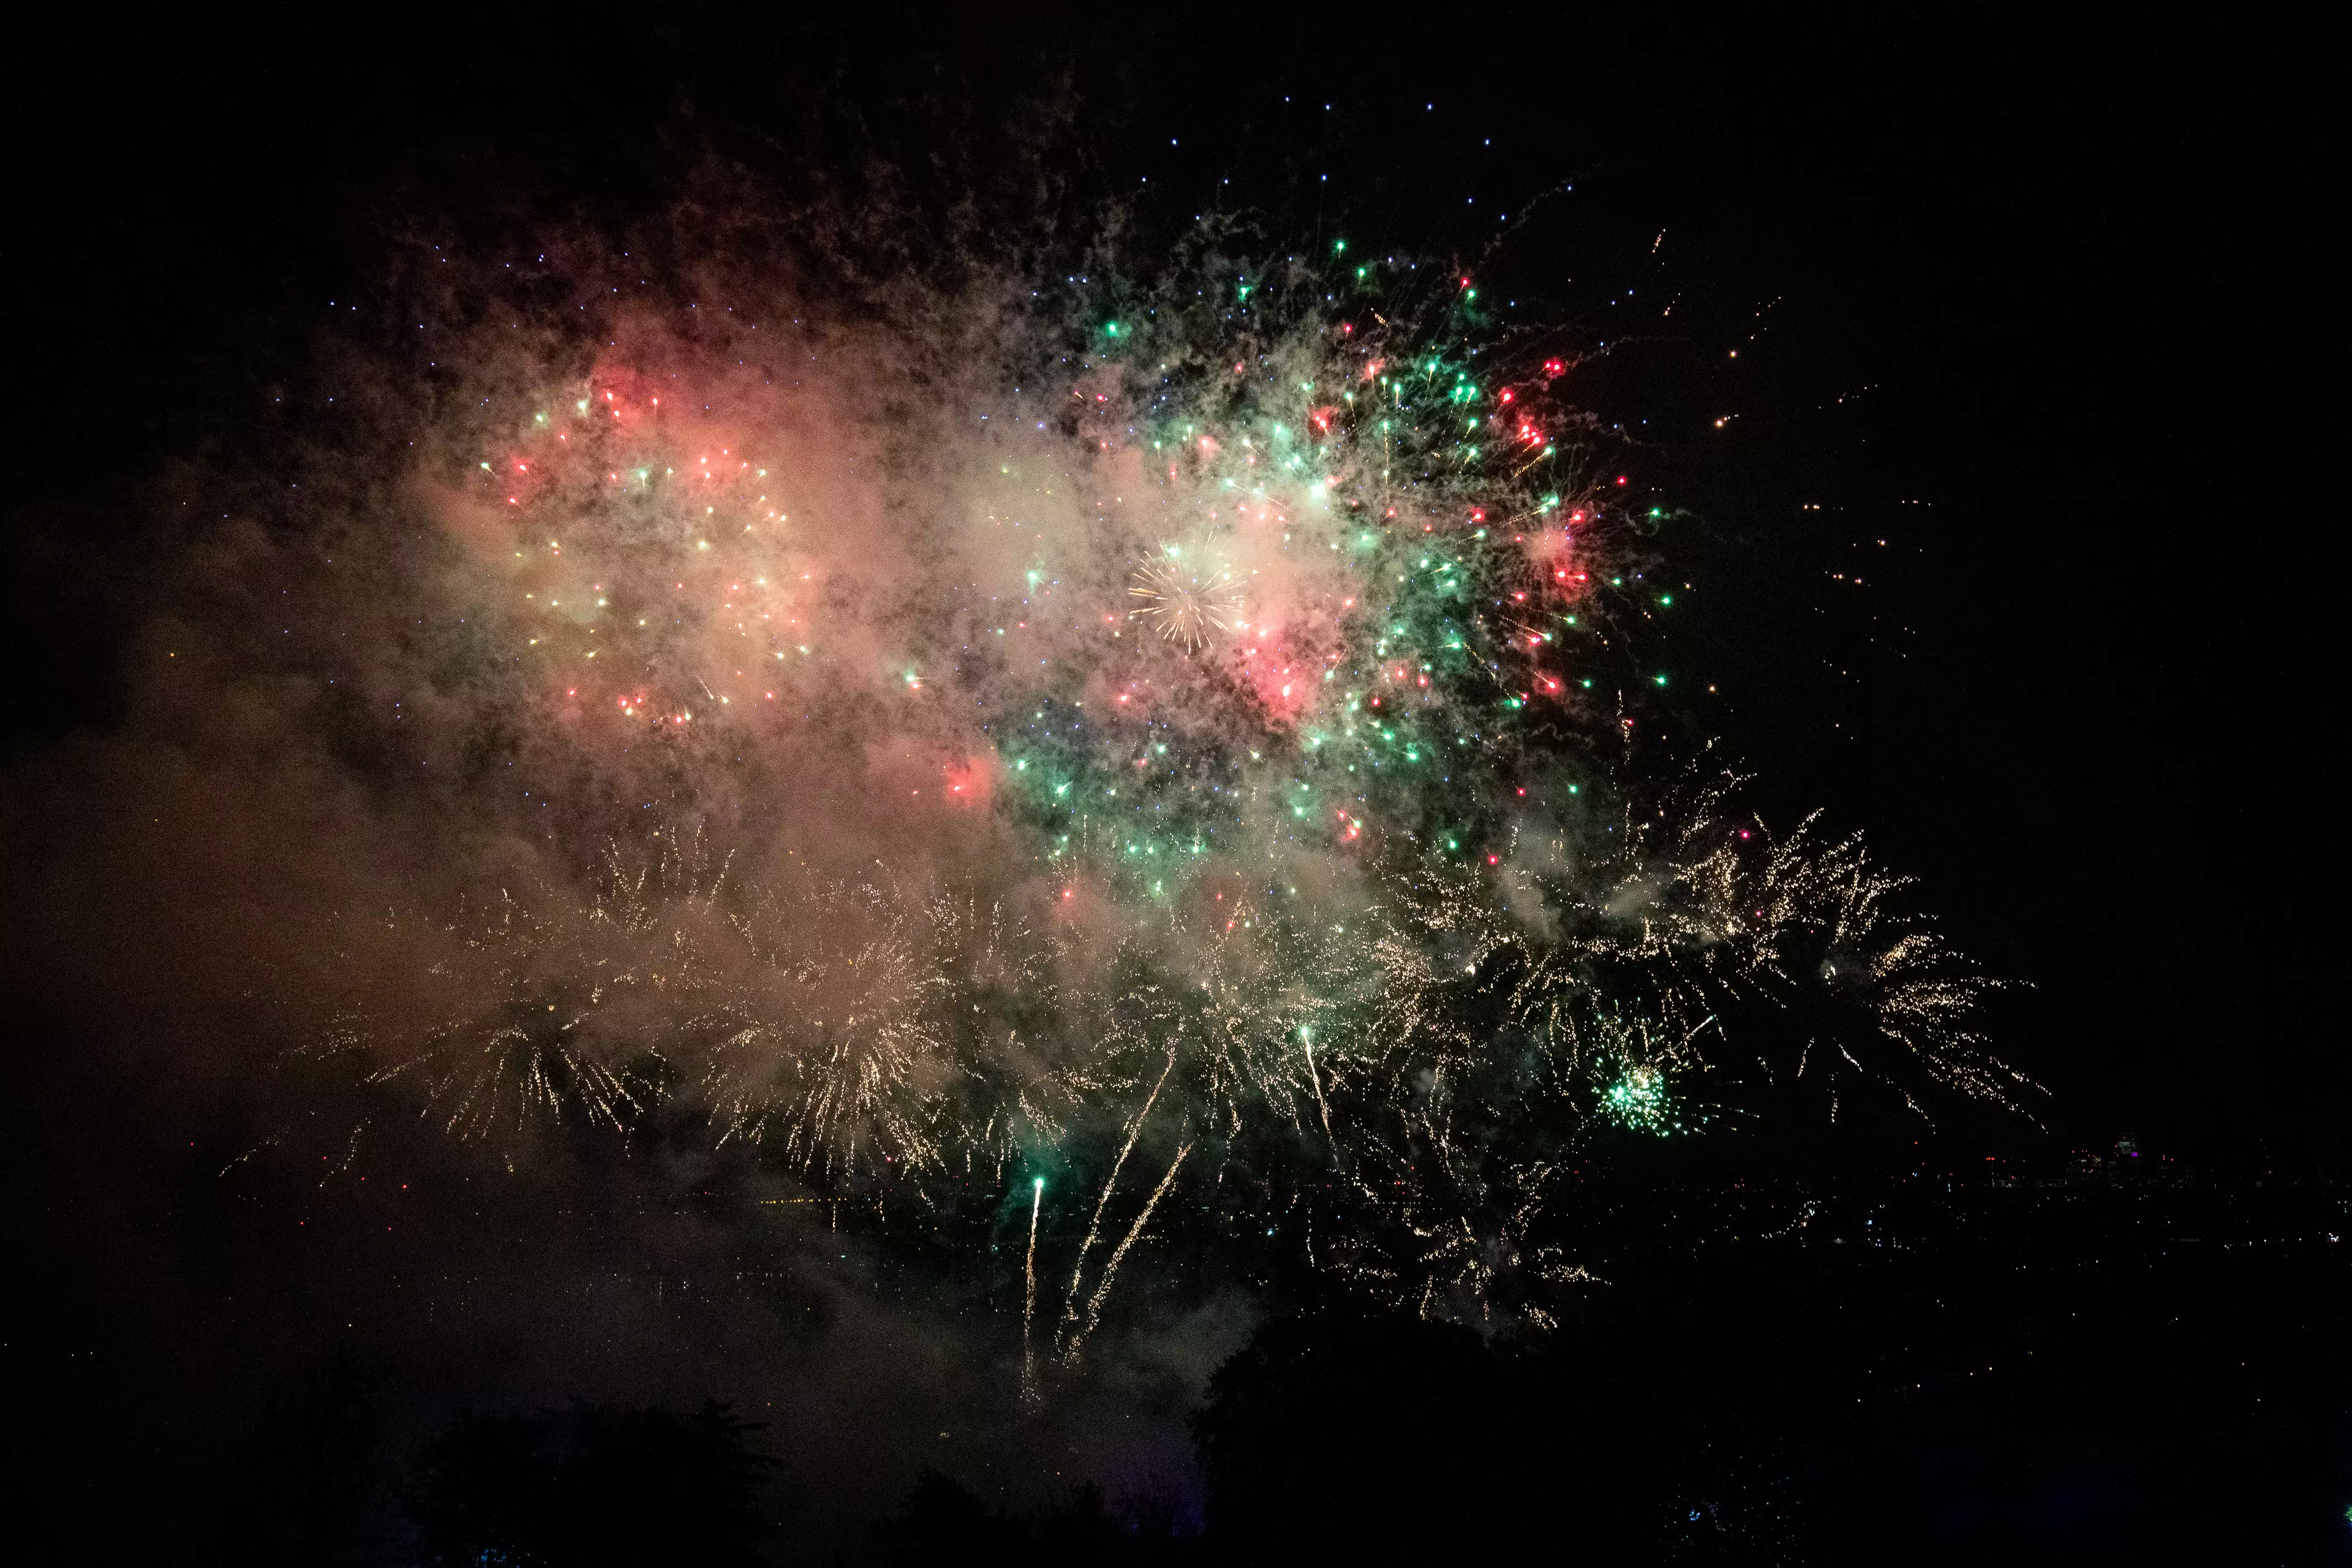 Stock image of fireworks.